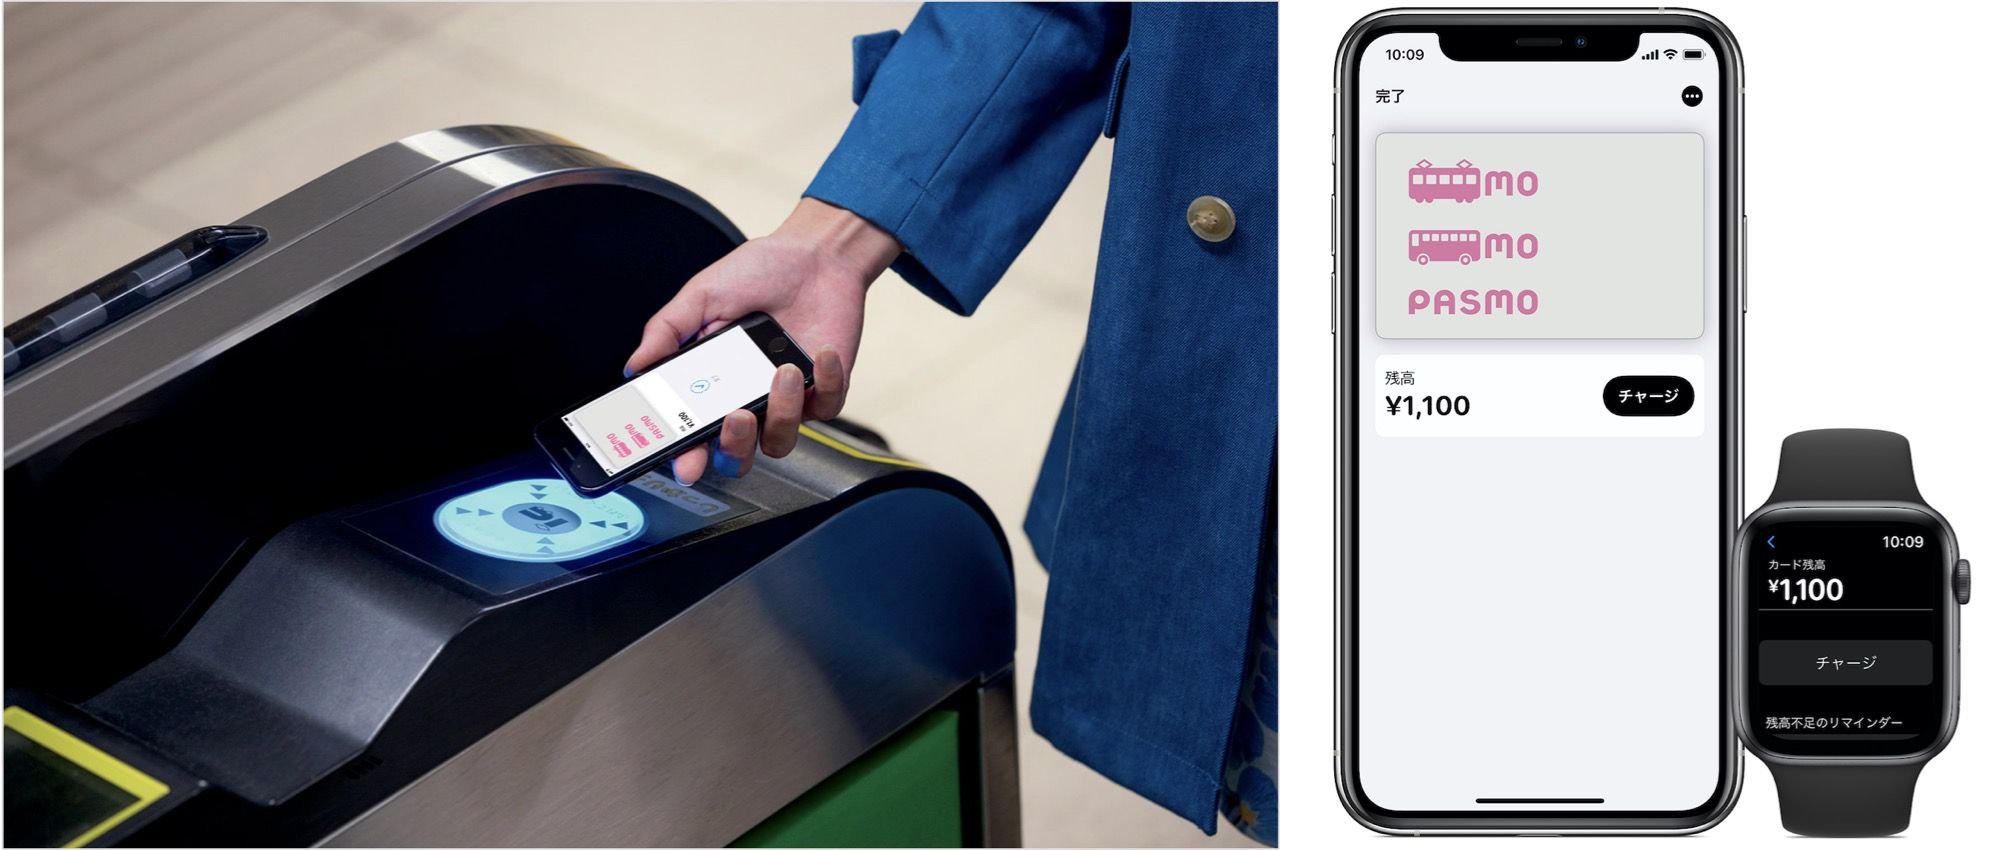 Apple Pay cover image